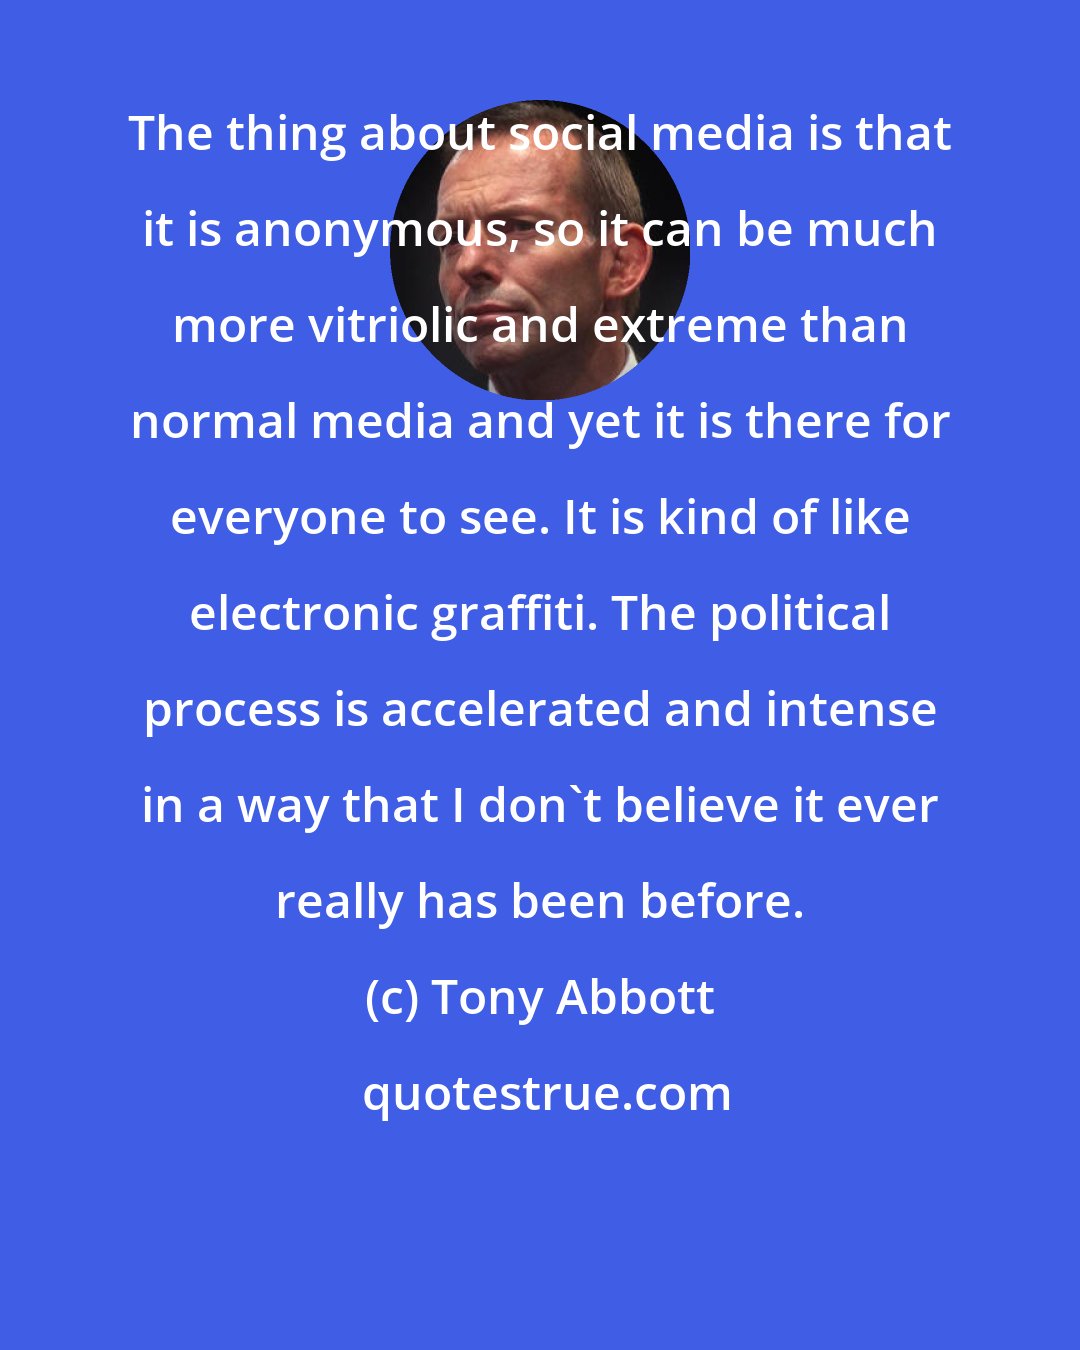 Tony Abbott: The thing about social media is that it is anonymous, so it can be much more vitriolic and extreme than normal media and yet it is there for everyone to see. It is kind of like electronic graffiti. The political process is accelerated and intense in a way that I don't believe it ever really has been before.